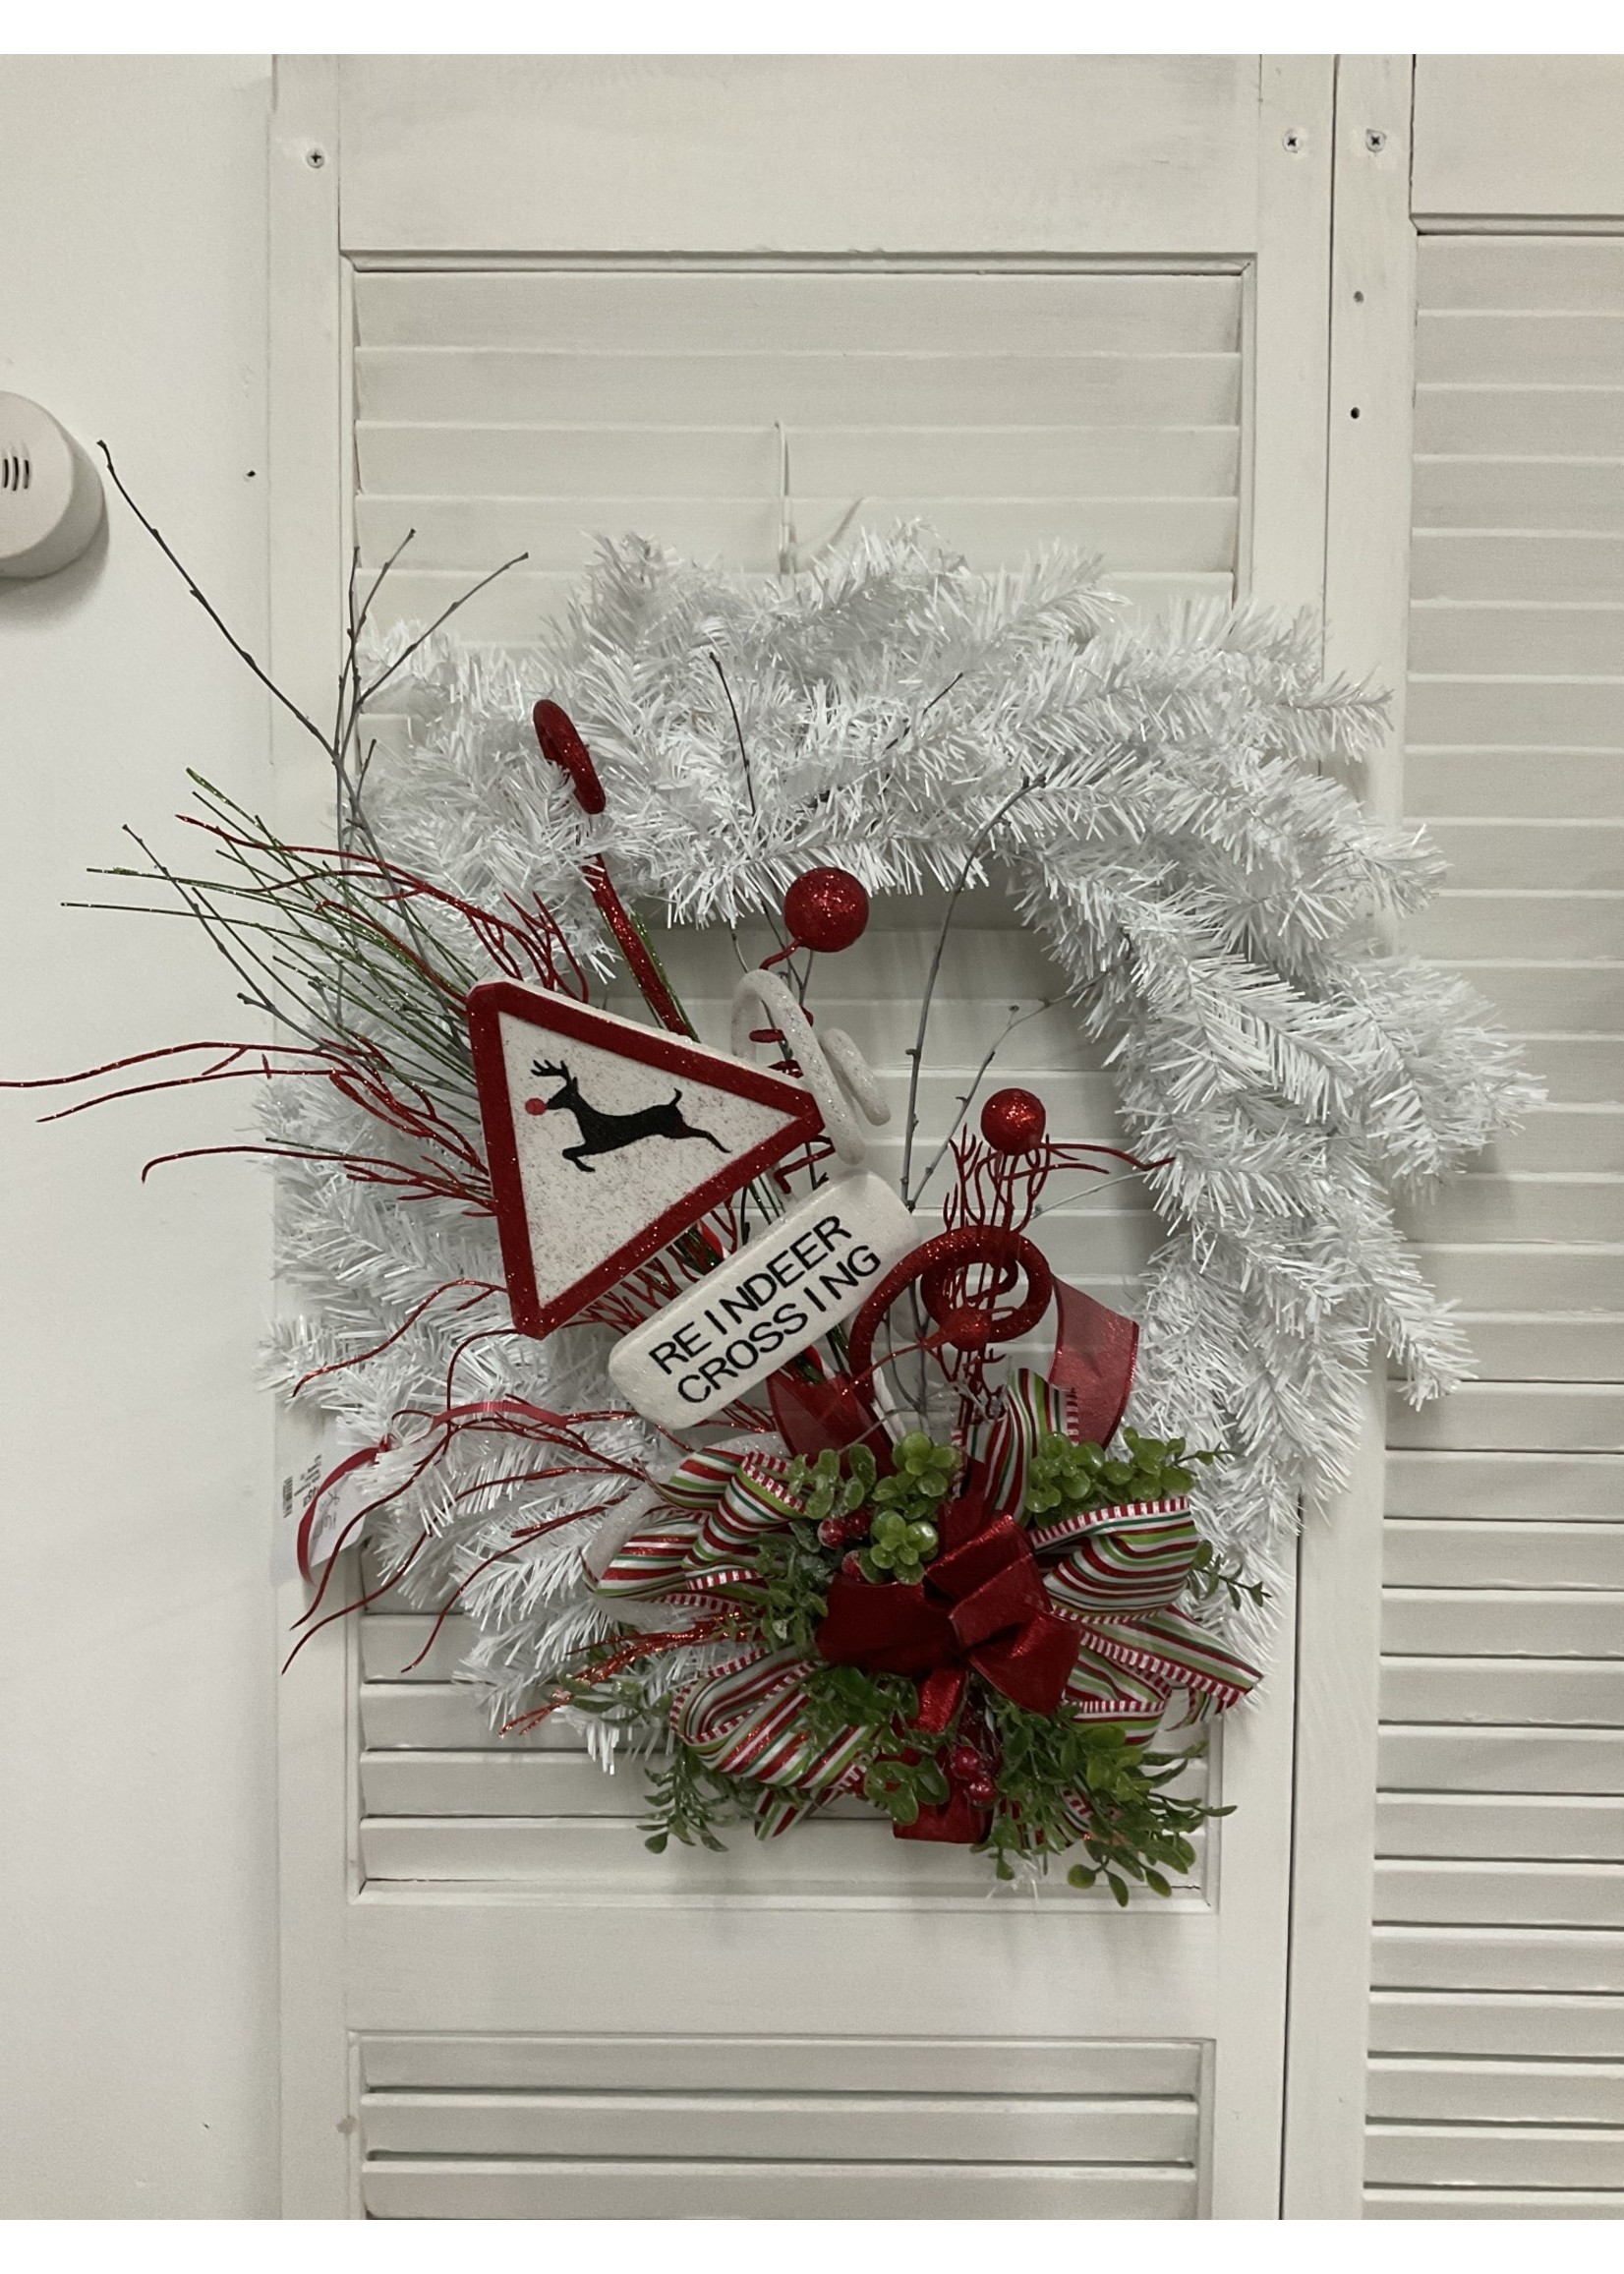 My New Favorite Thing Wreath Evergreen White "Reindeer Crossing" with Green and Red Ribbon 22 inches